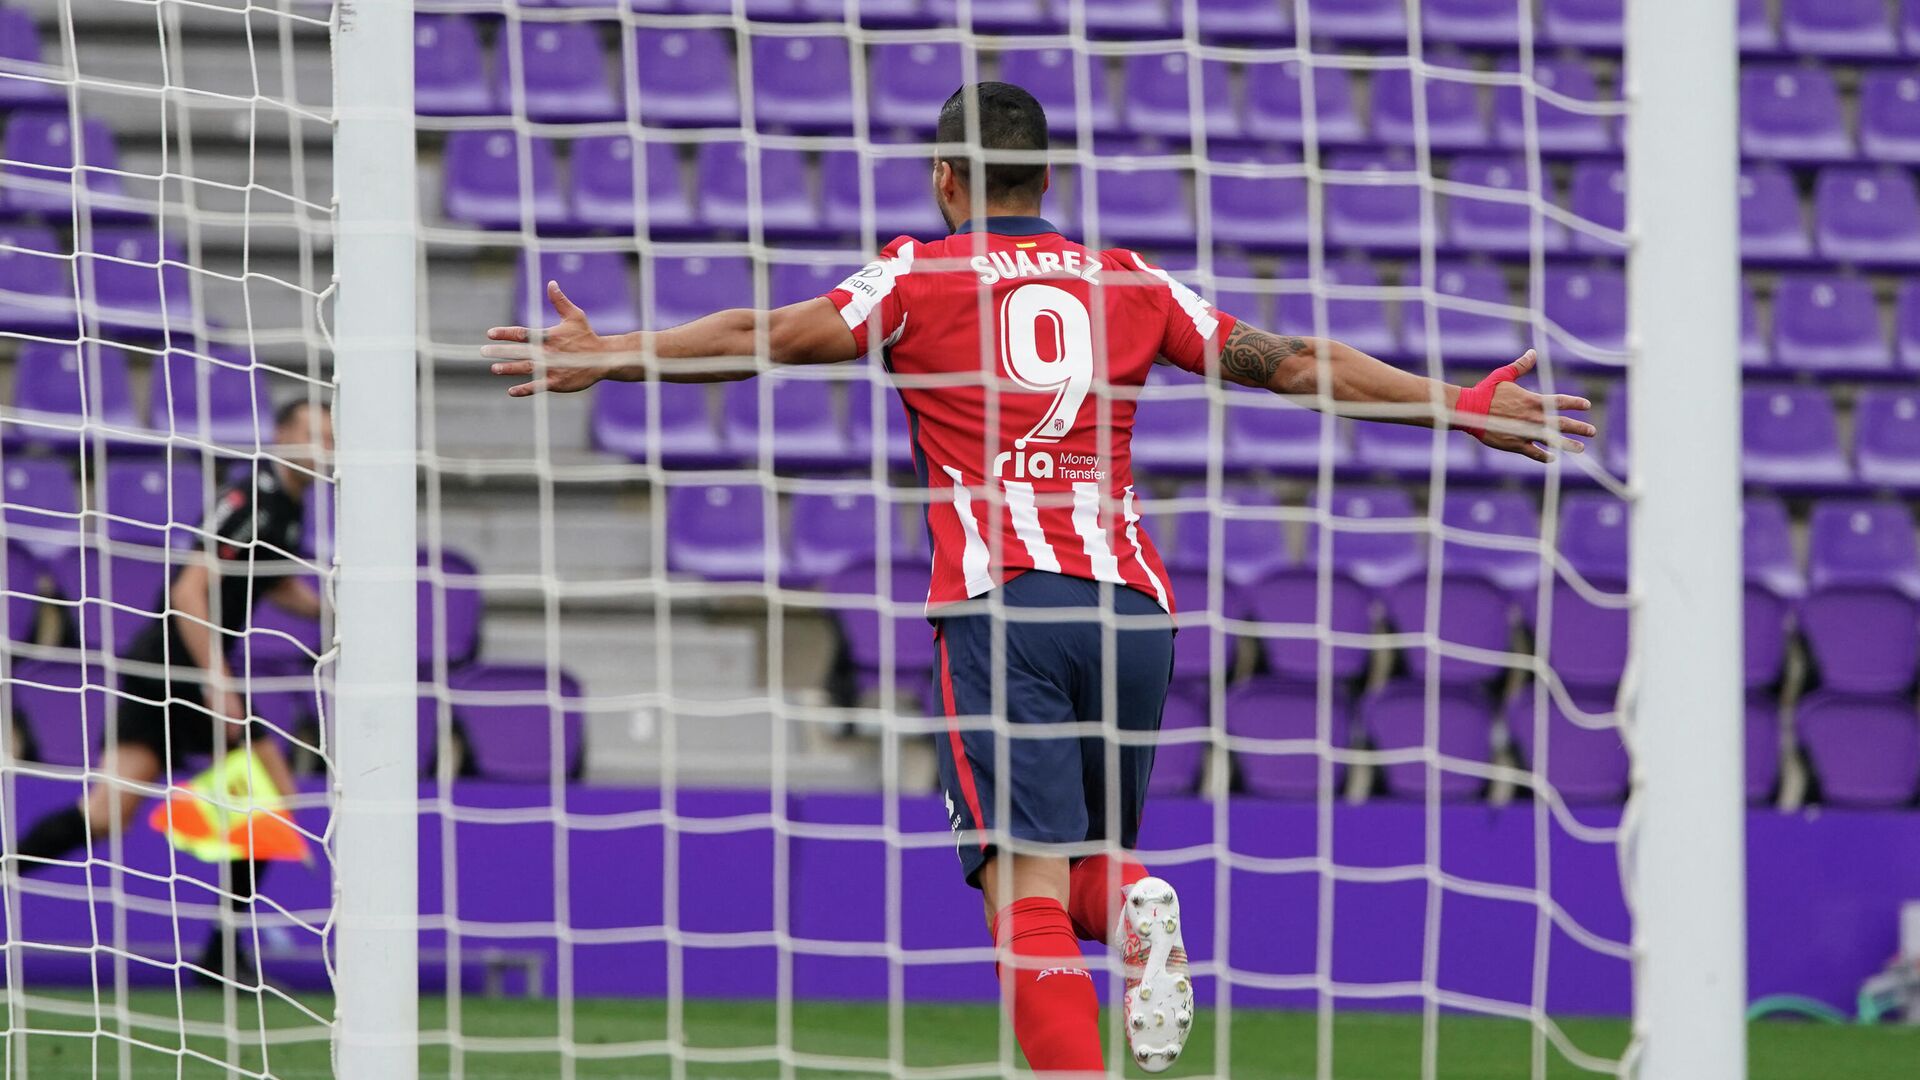 Atletico Madrid's Uruguayan forward Luis Suarez  celebrates after scoring during the Spanish league football match Real Valladolid FC against Club Atletico de Madrid at the Jose Zorilla stadium in Valladolid on May 22, 2021. (Photo by CESAR MANSO / AFP) - РИА Новости, 1920, 22.05.2021